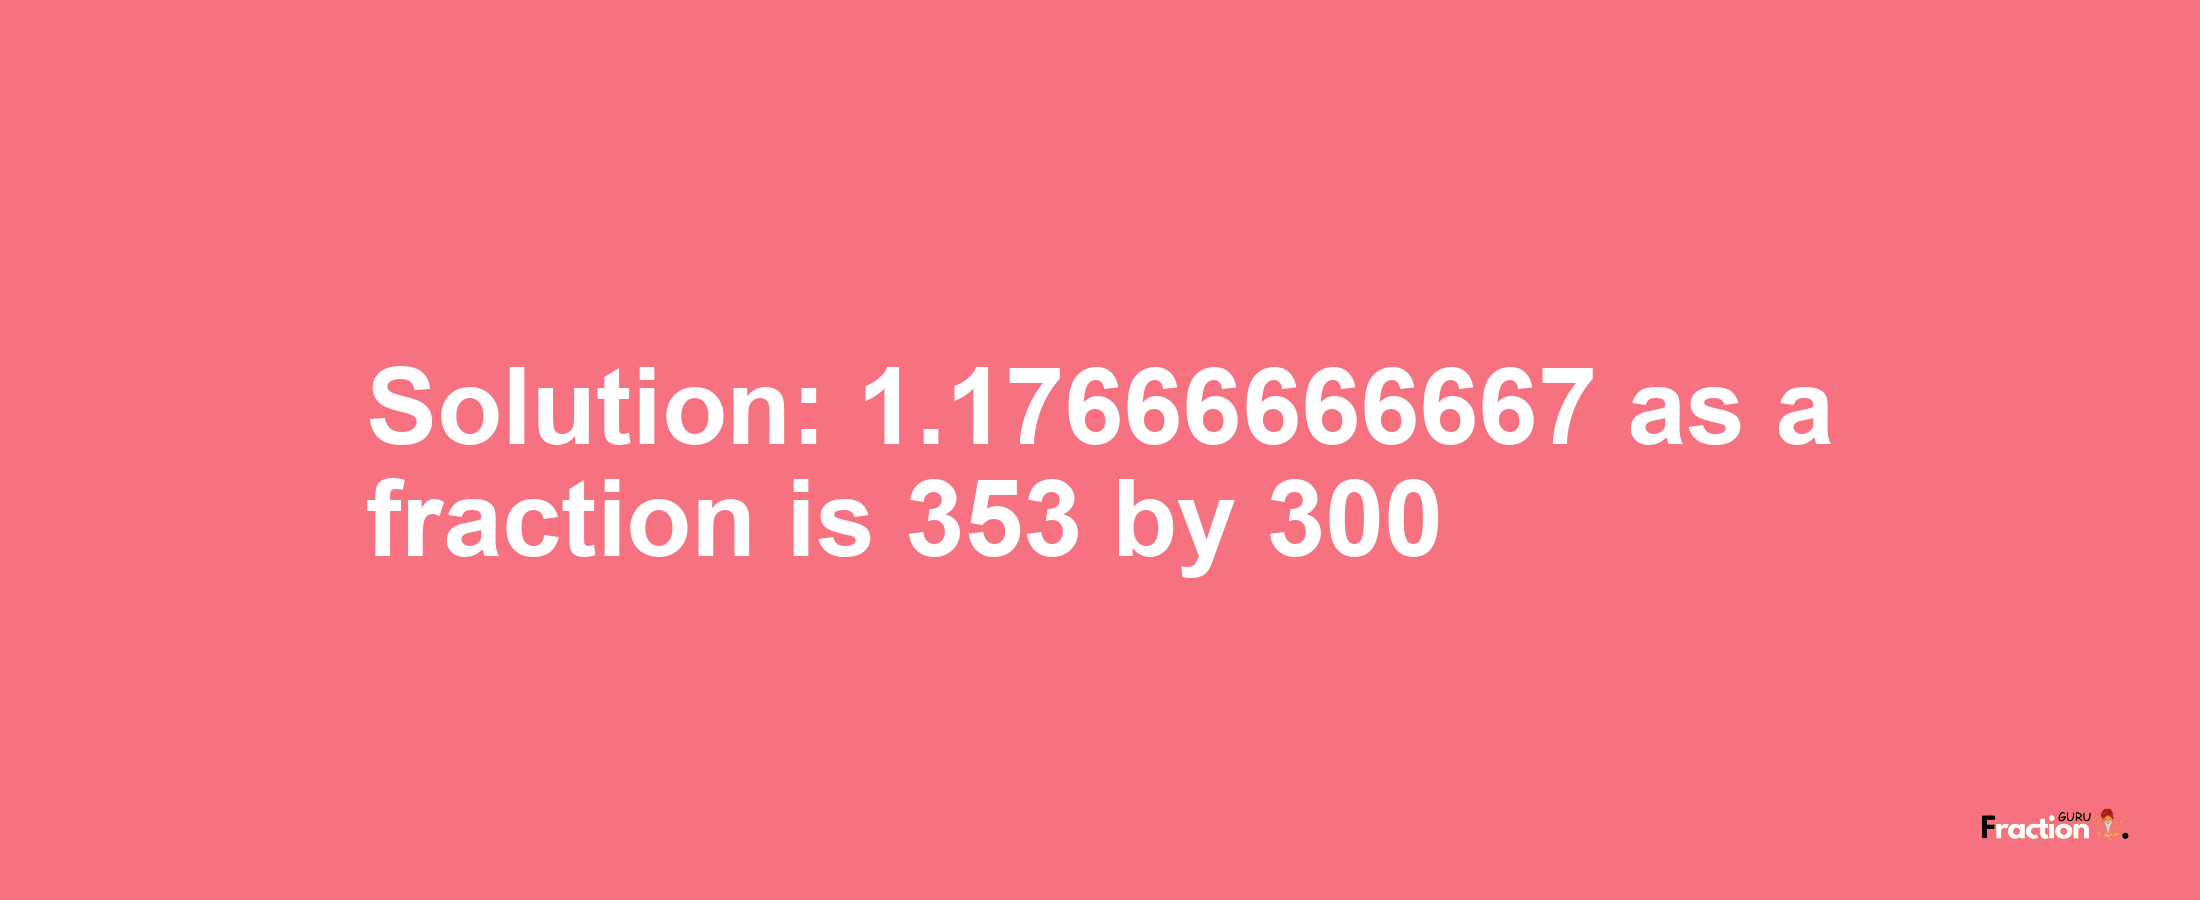 Solution:1.17666666667 as a fraction is 353/300